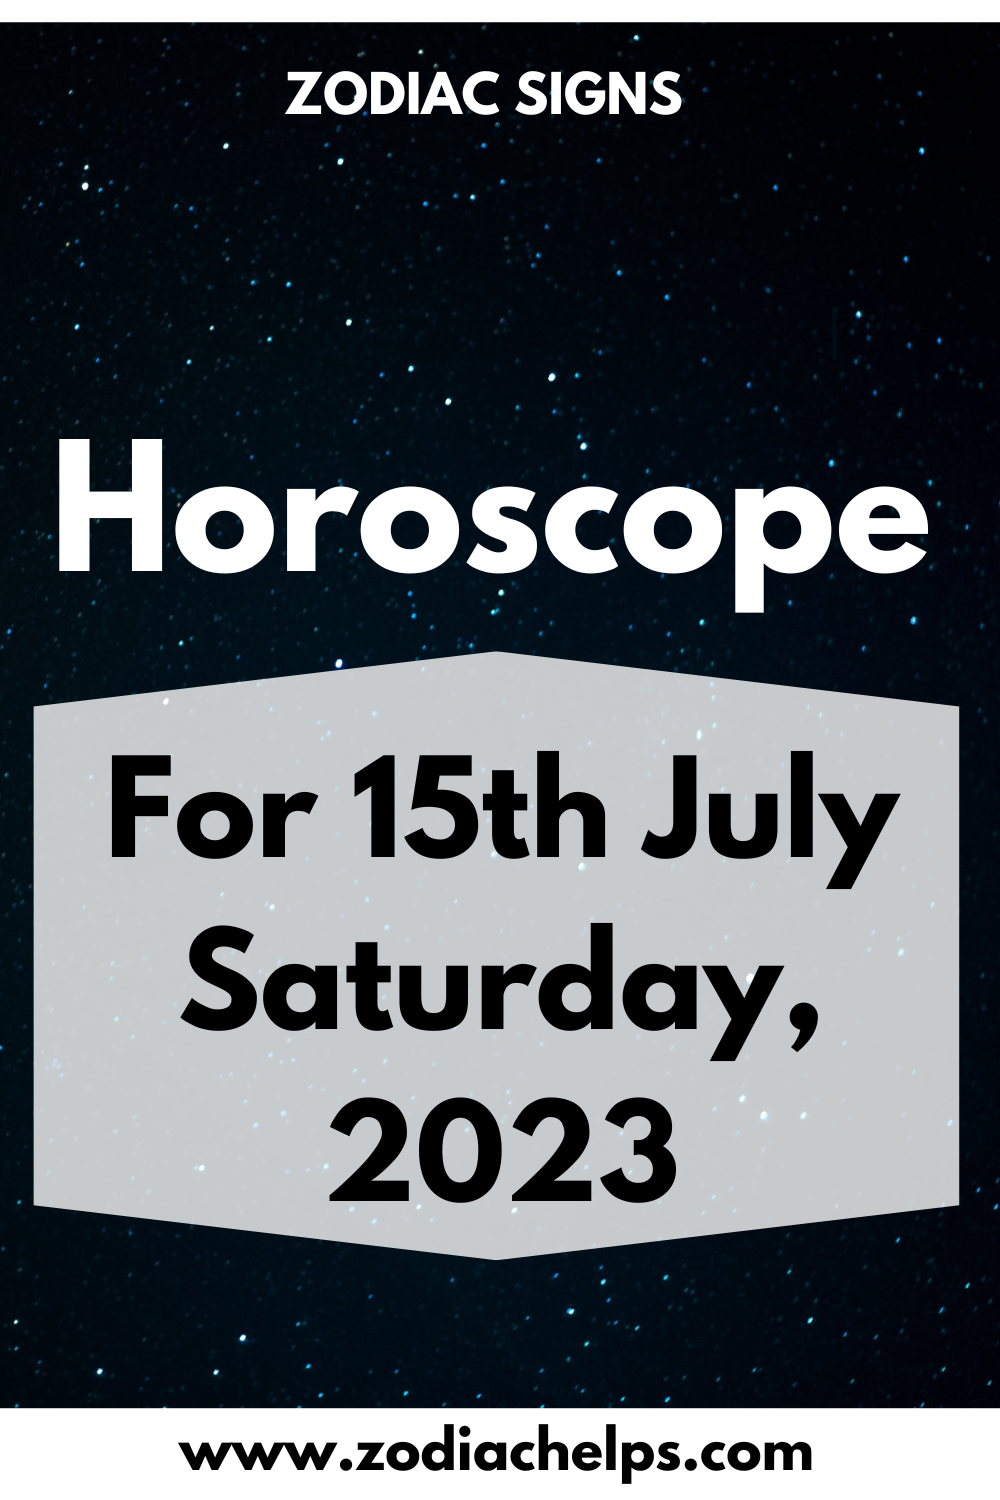 Horoscope for 15th July Saturday, 2023